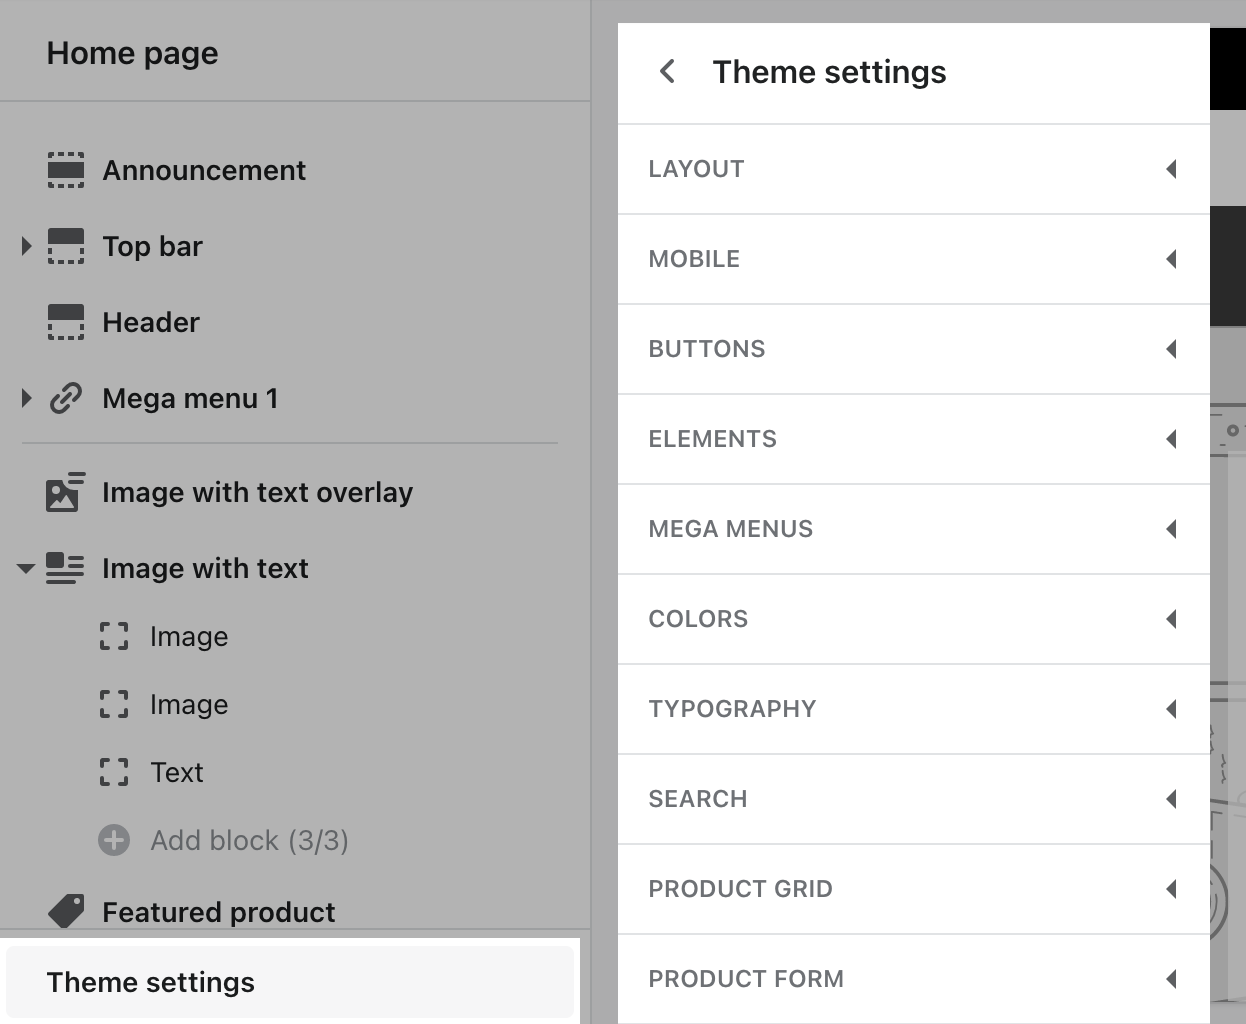 click_theme_settings_to_open_global_settings_for_theme_features.png